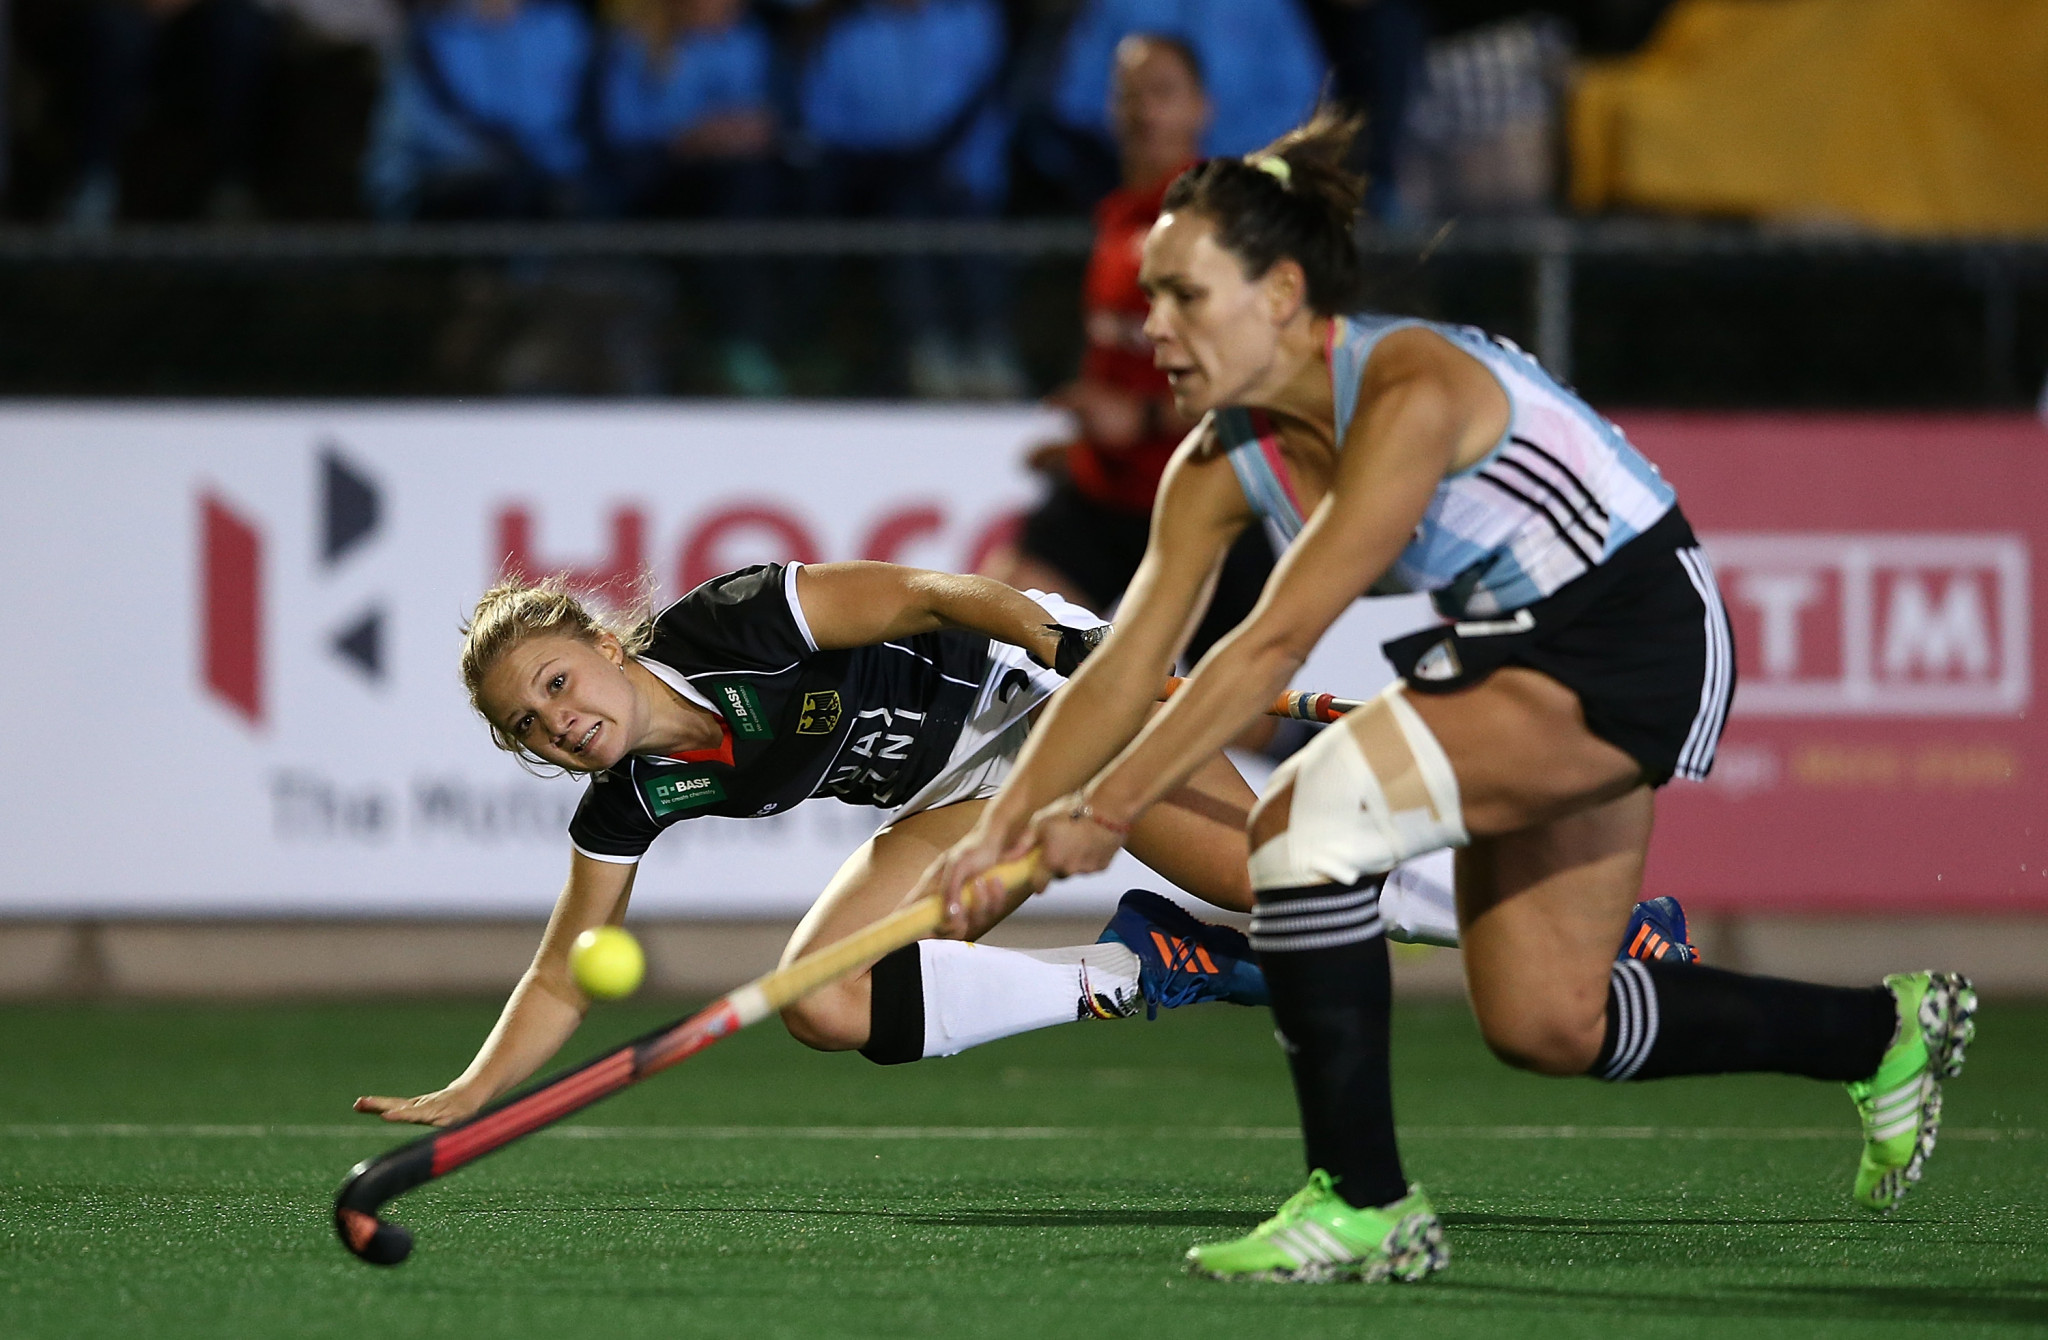 Argentina will hope to defend their Women's Hockey League title ©Getty Images